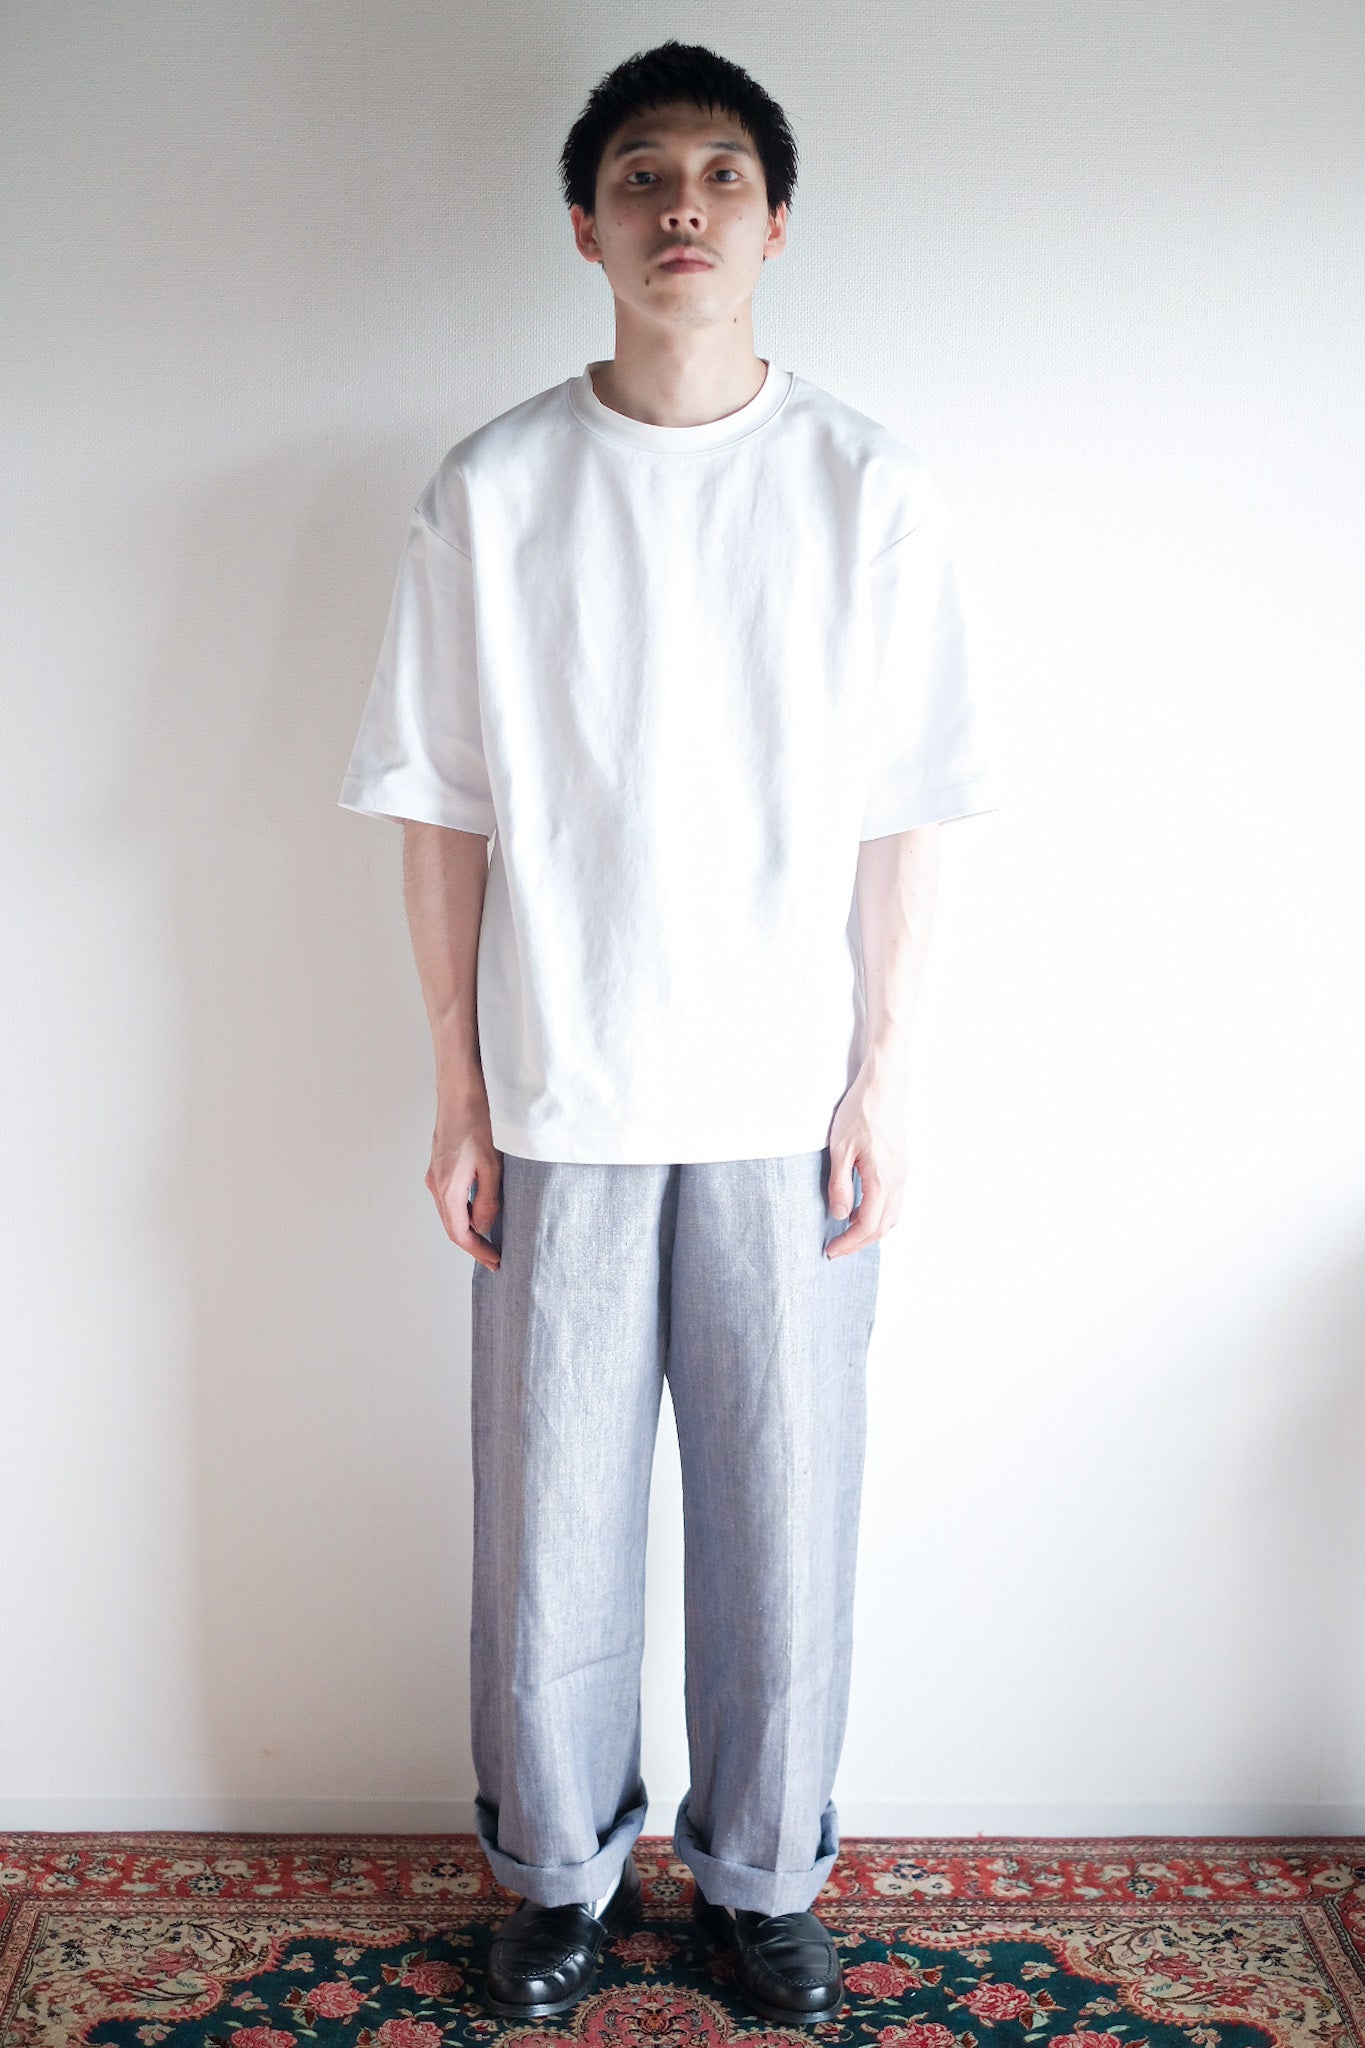 [~ 50's] French Navy Ramie Linen Sailor Pant